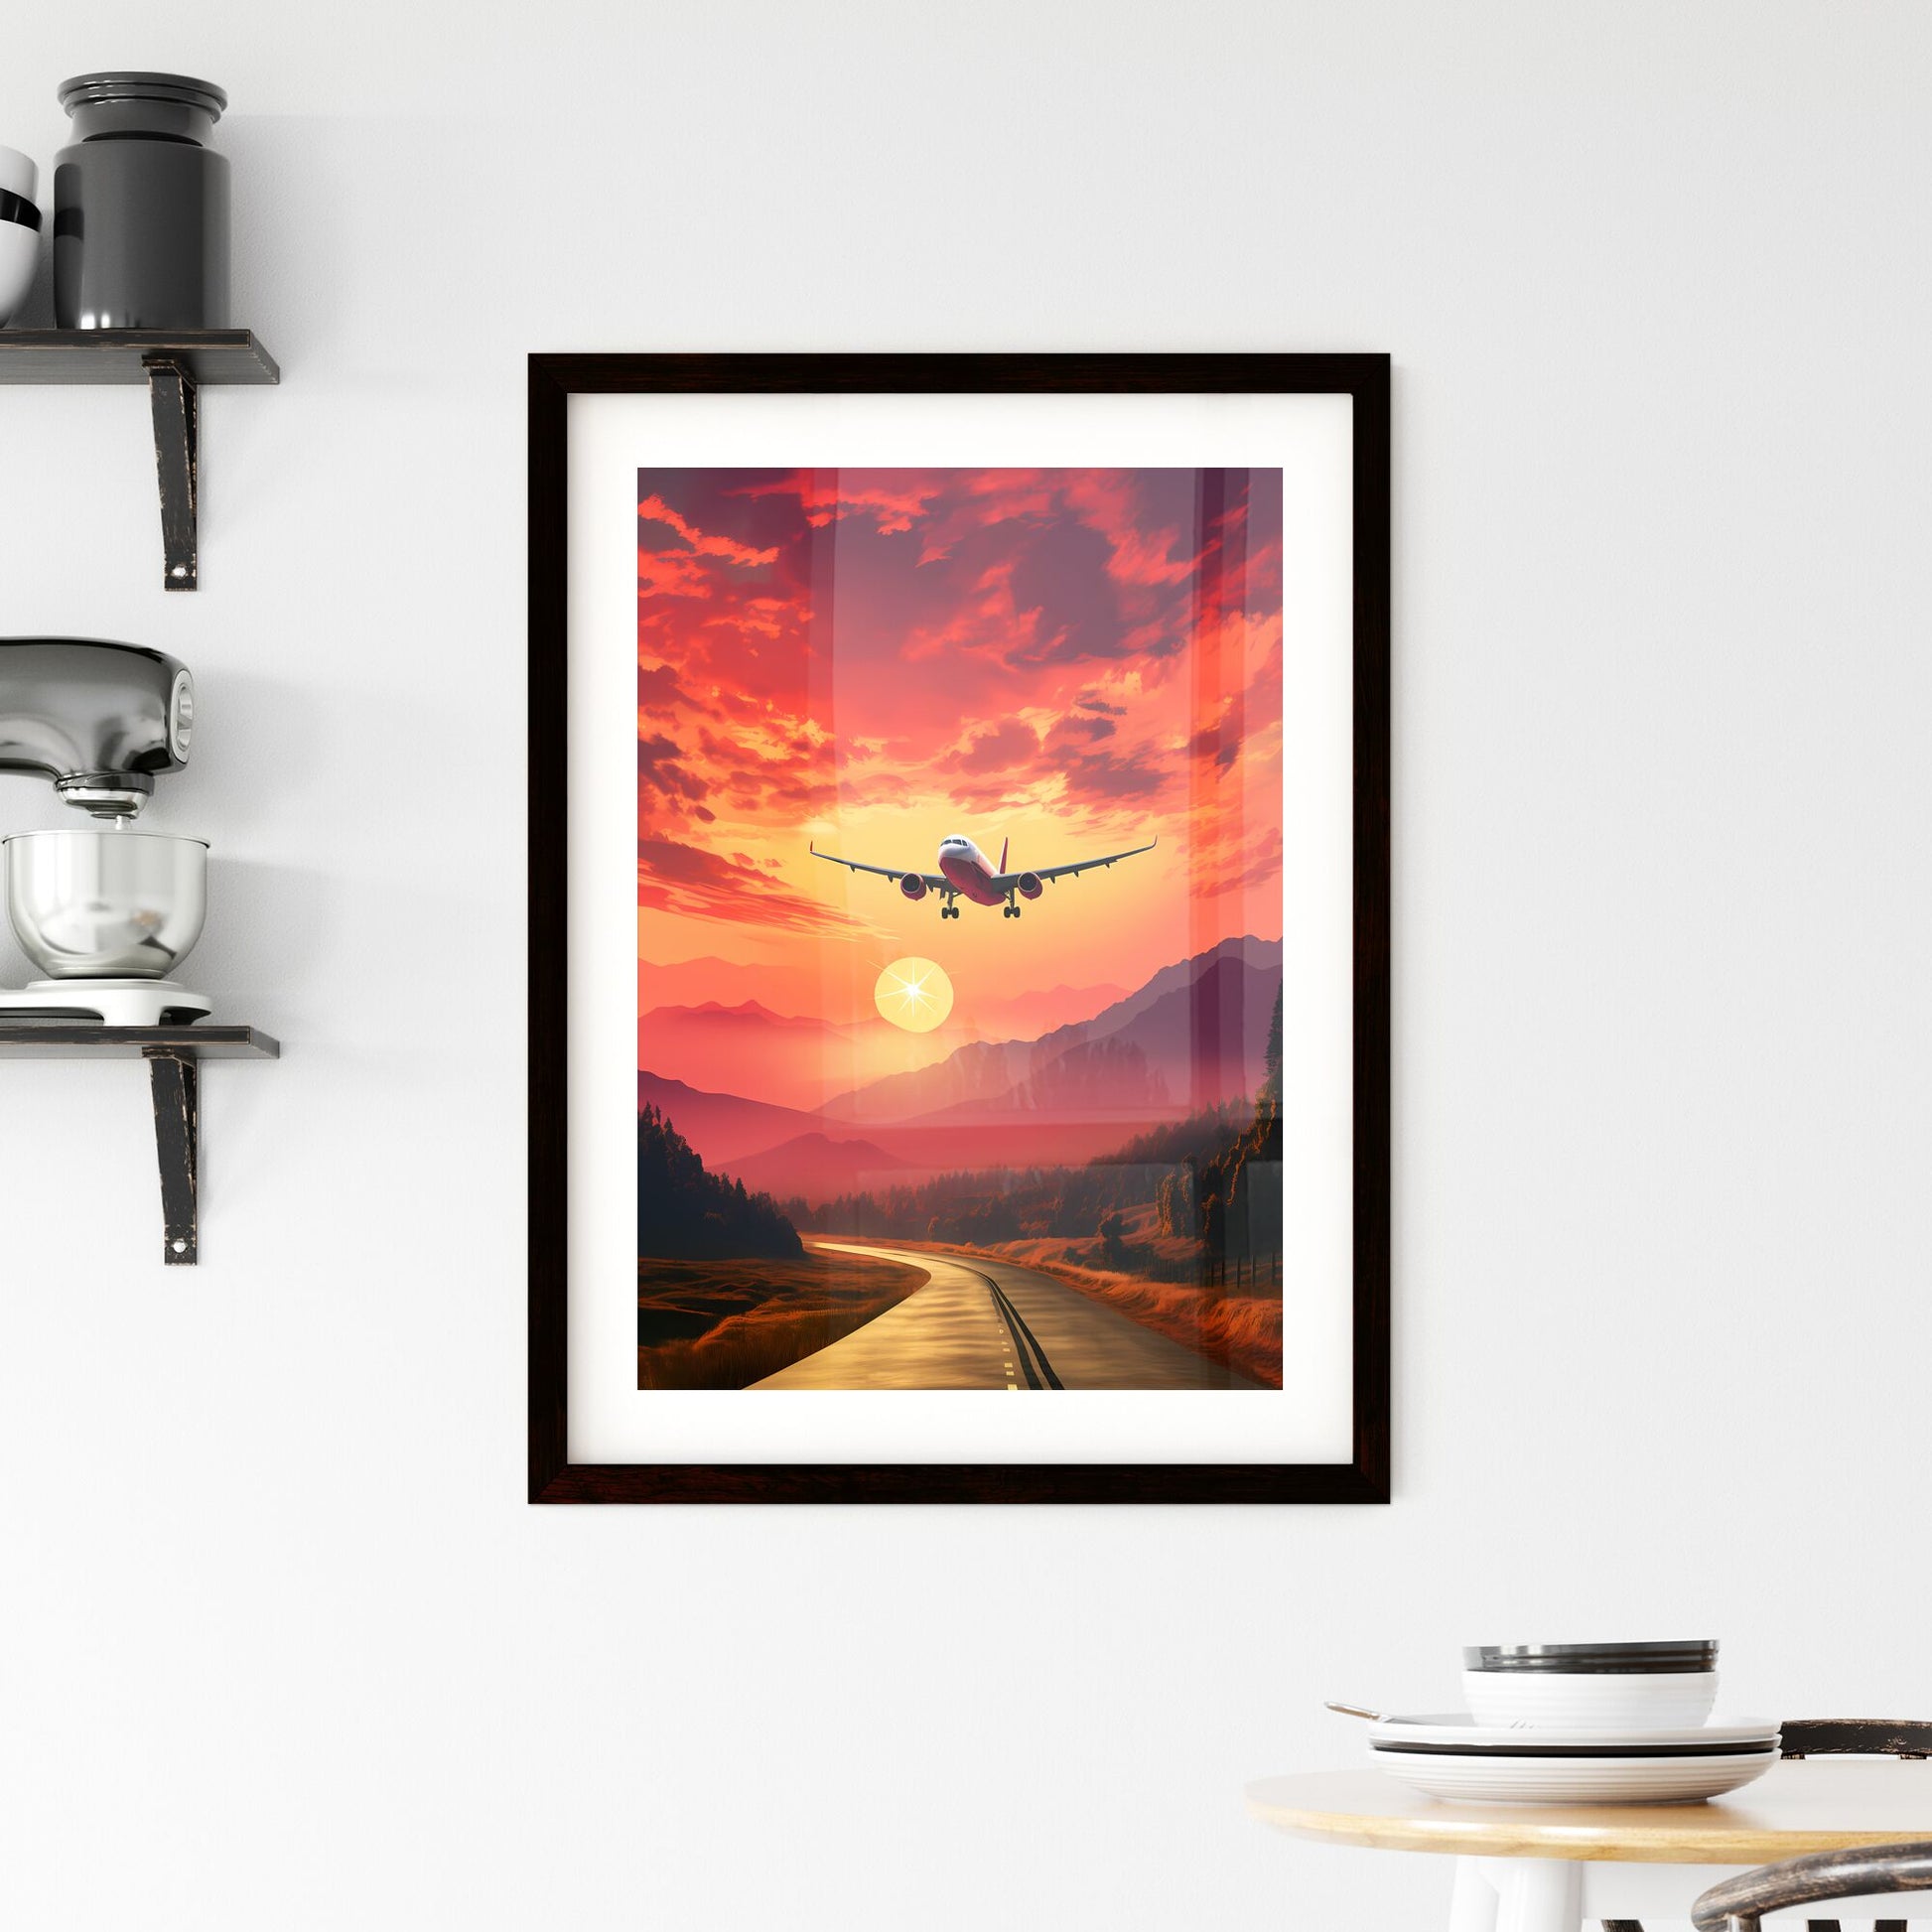 Travelling hobby poster, simple, layout, airportcore - Art print of an airplane flying over a road Default Title